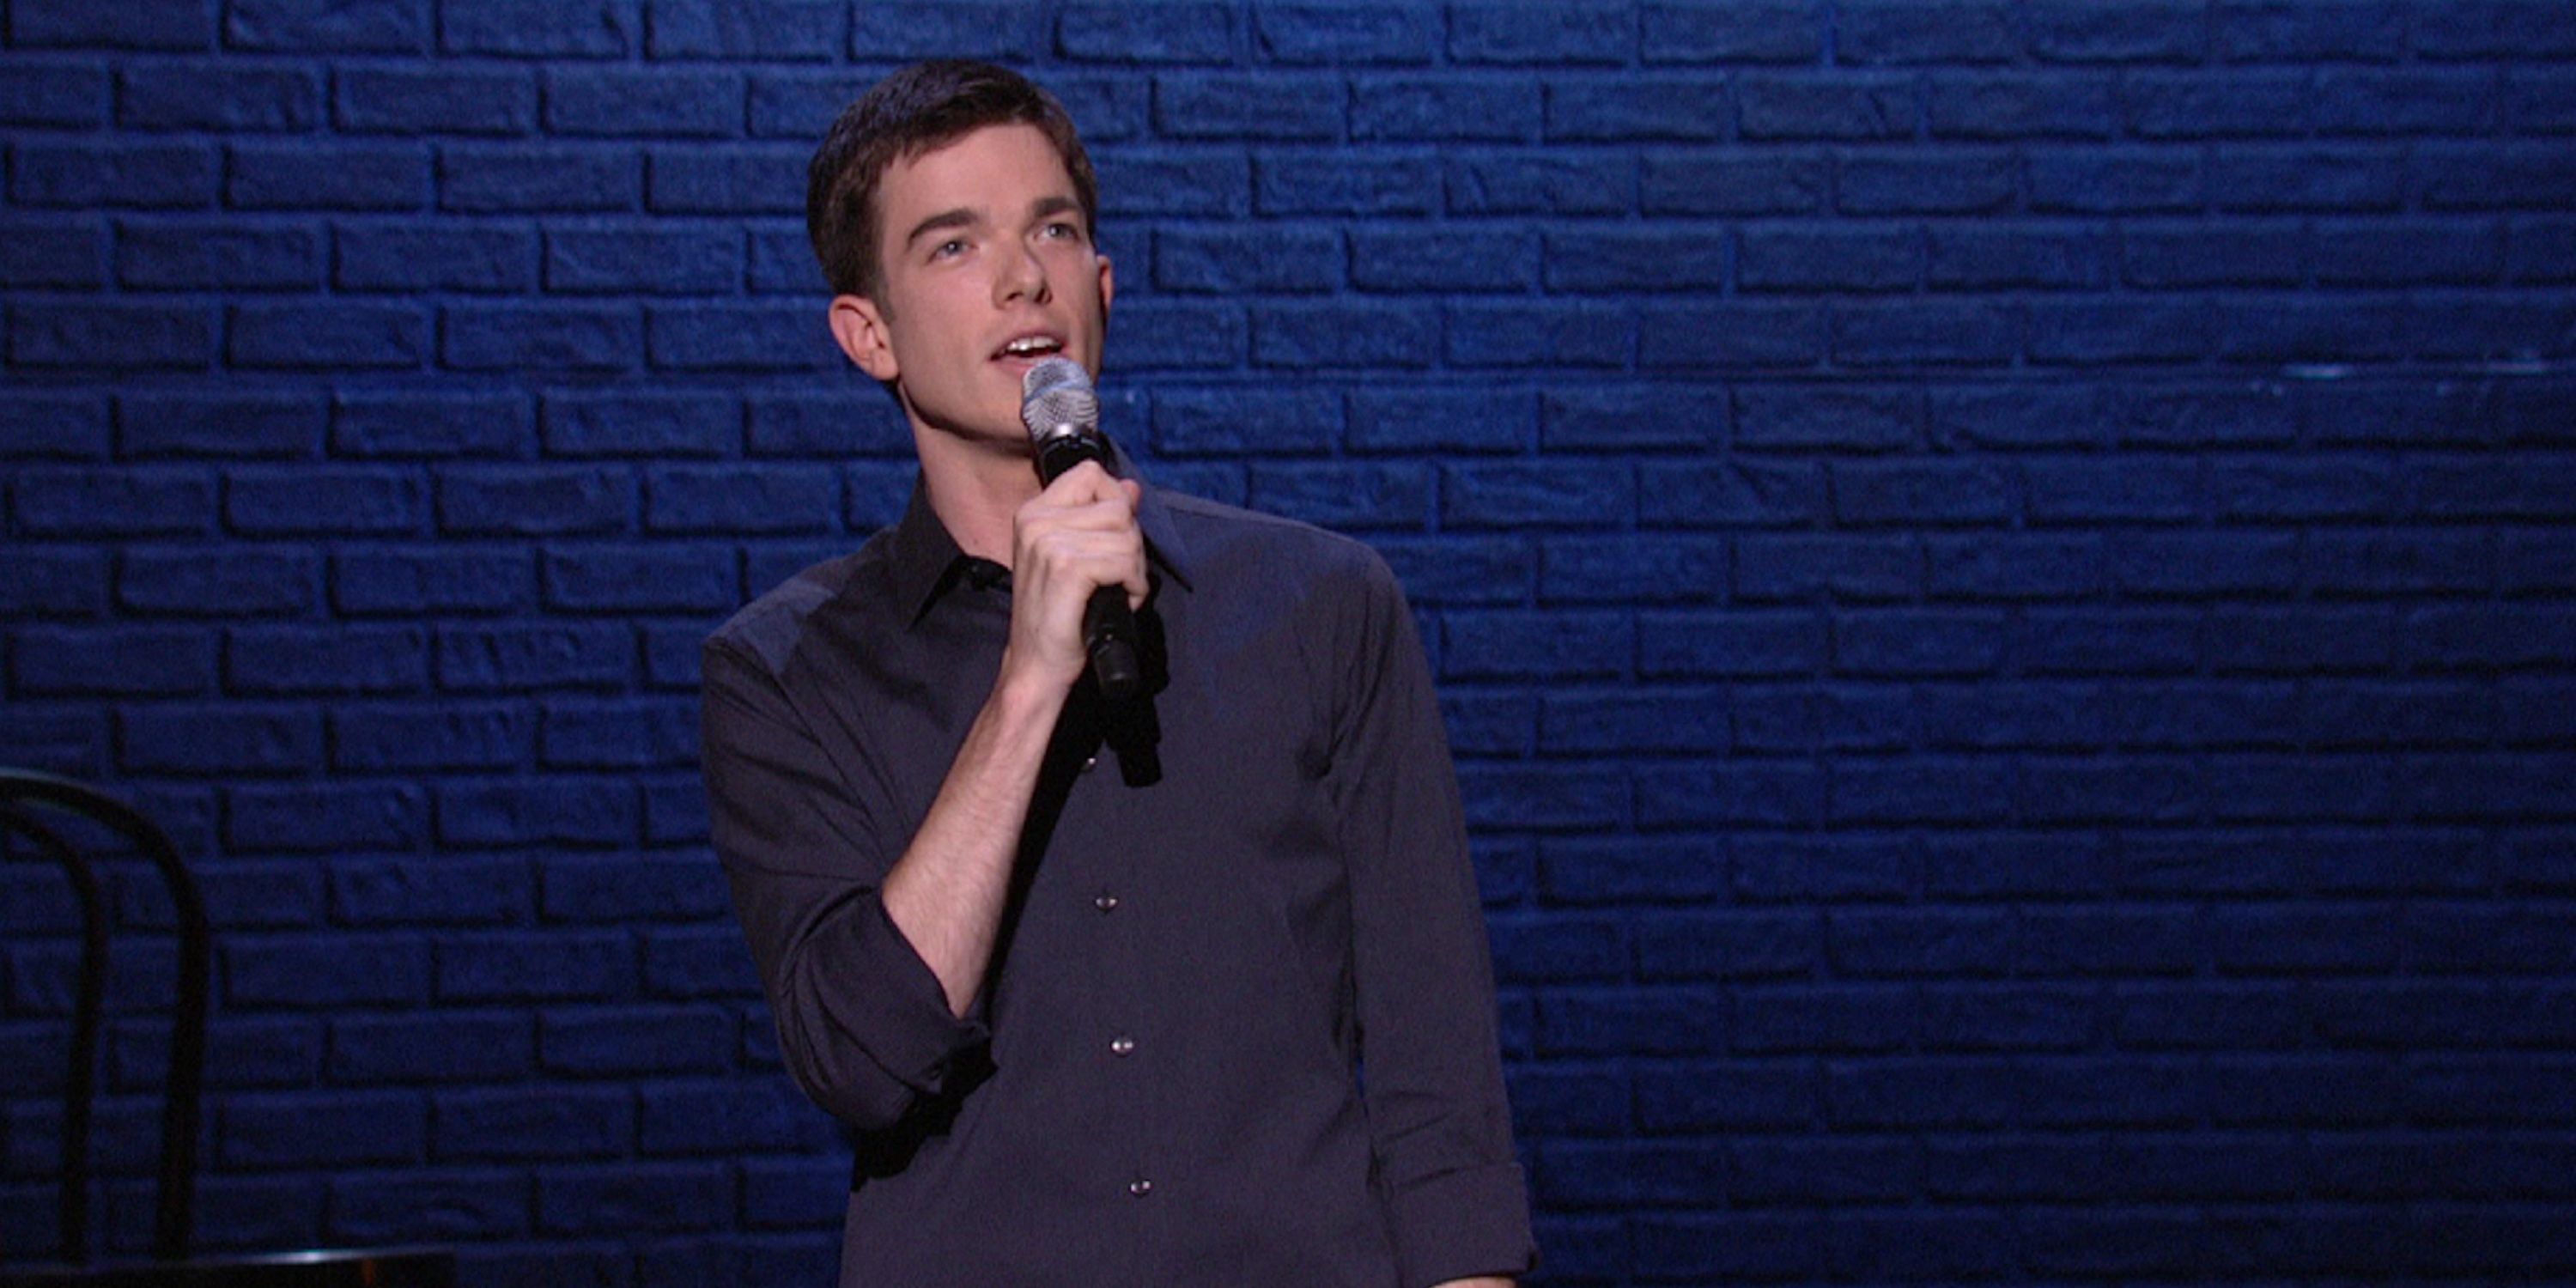 John Mulaney on stage in Comedy Central Presents: John Mulaney